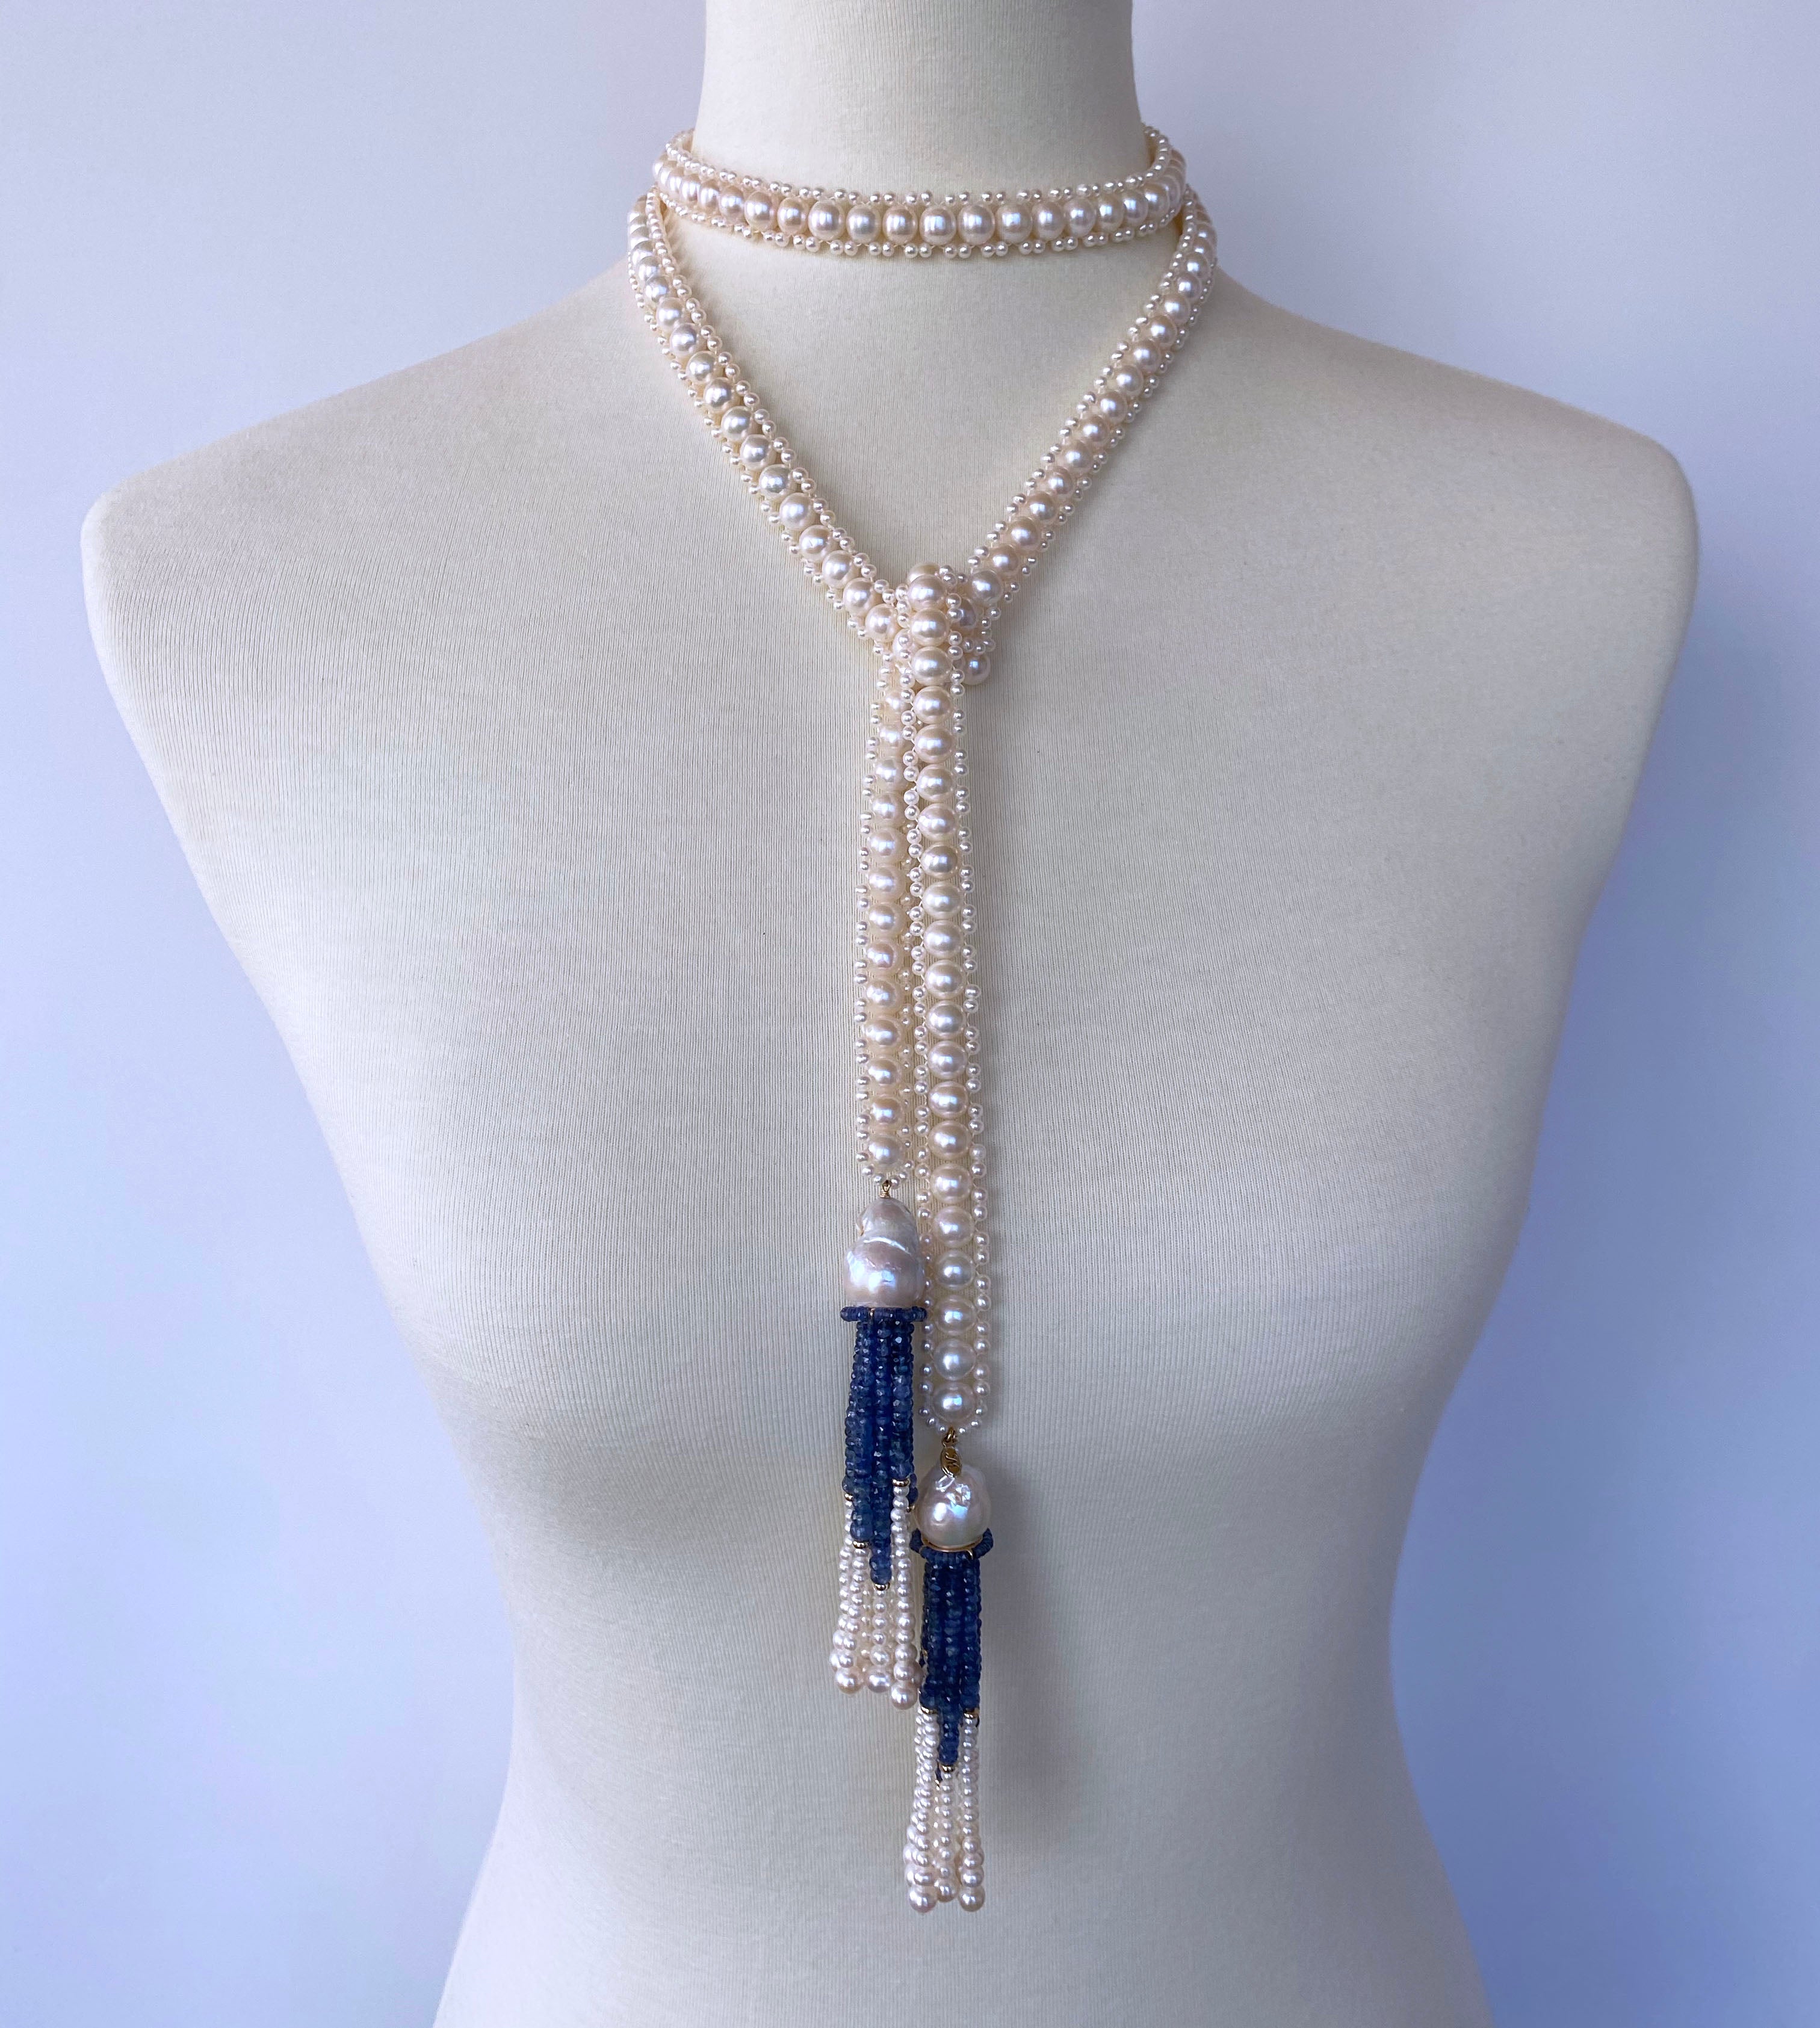 Gorgeous Sautoir all hand made by Marina J. in Los Angeles. This gorgeous piece is made of all real high luster white Pearls (2.5mm and 8mm) woven together. Measuring 46 inches long sans Tassel, each end of this Sautoir meets at a beautiful 3.75